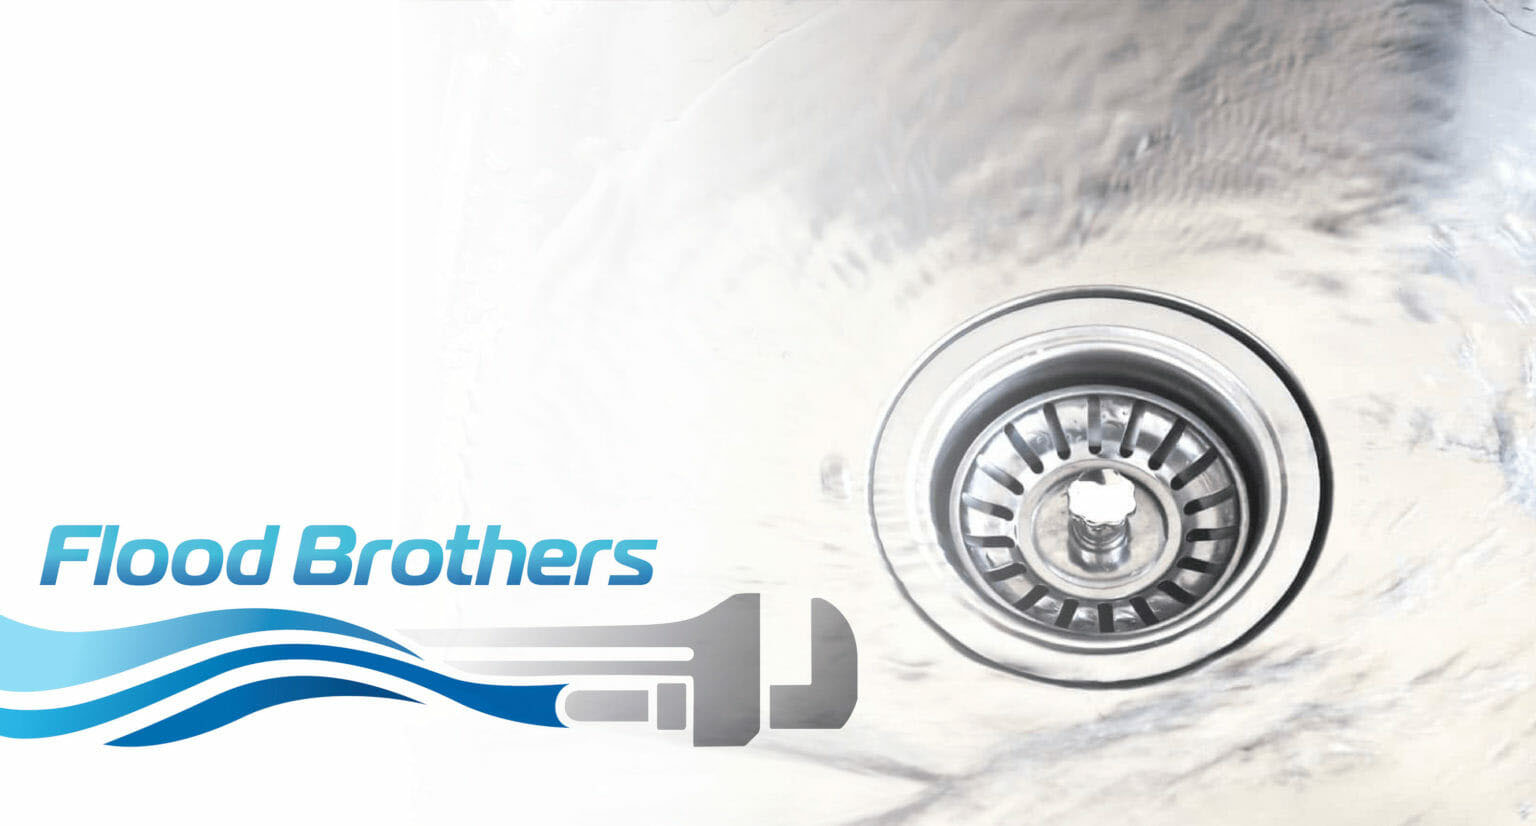 Flood Brothers logo with kitchen sink drain